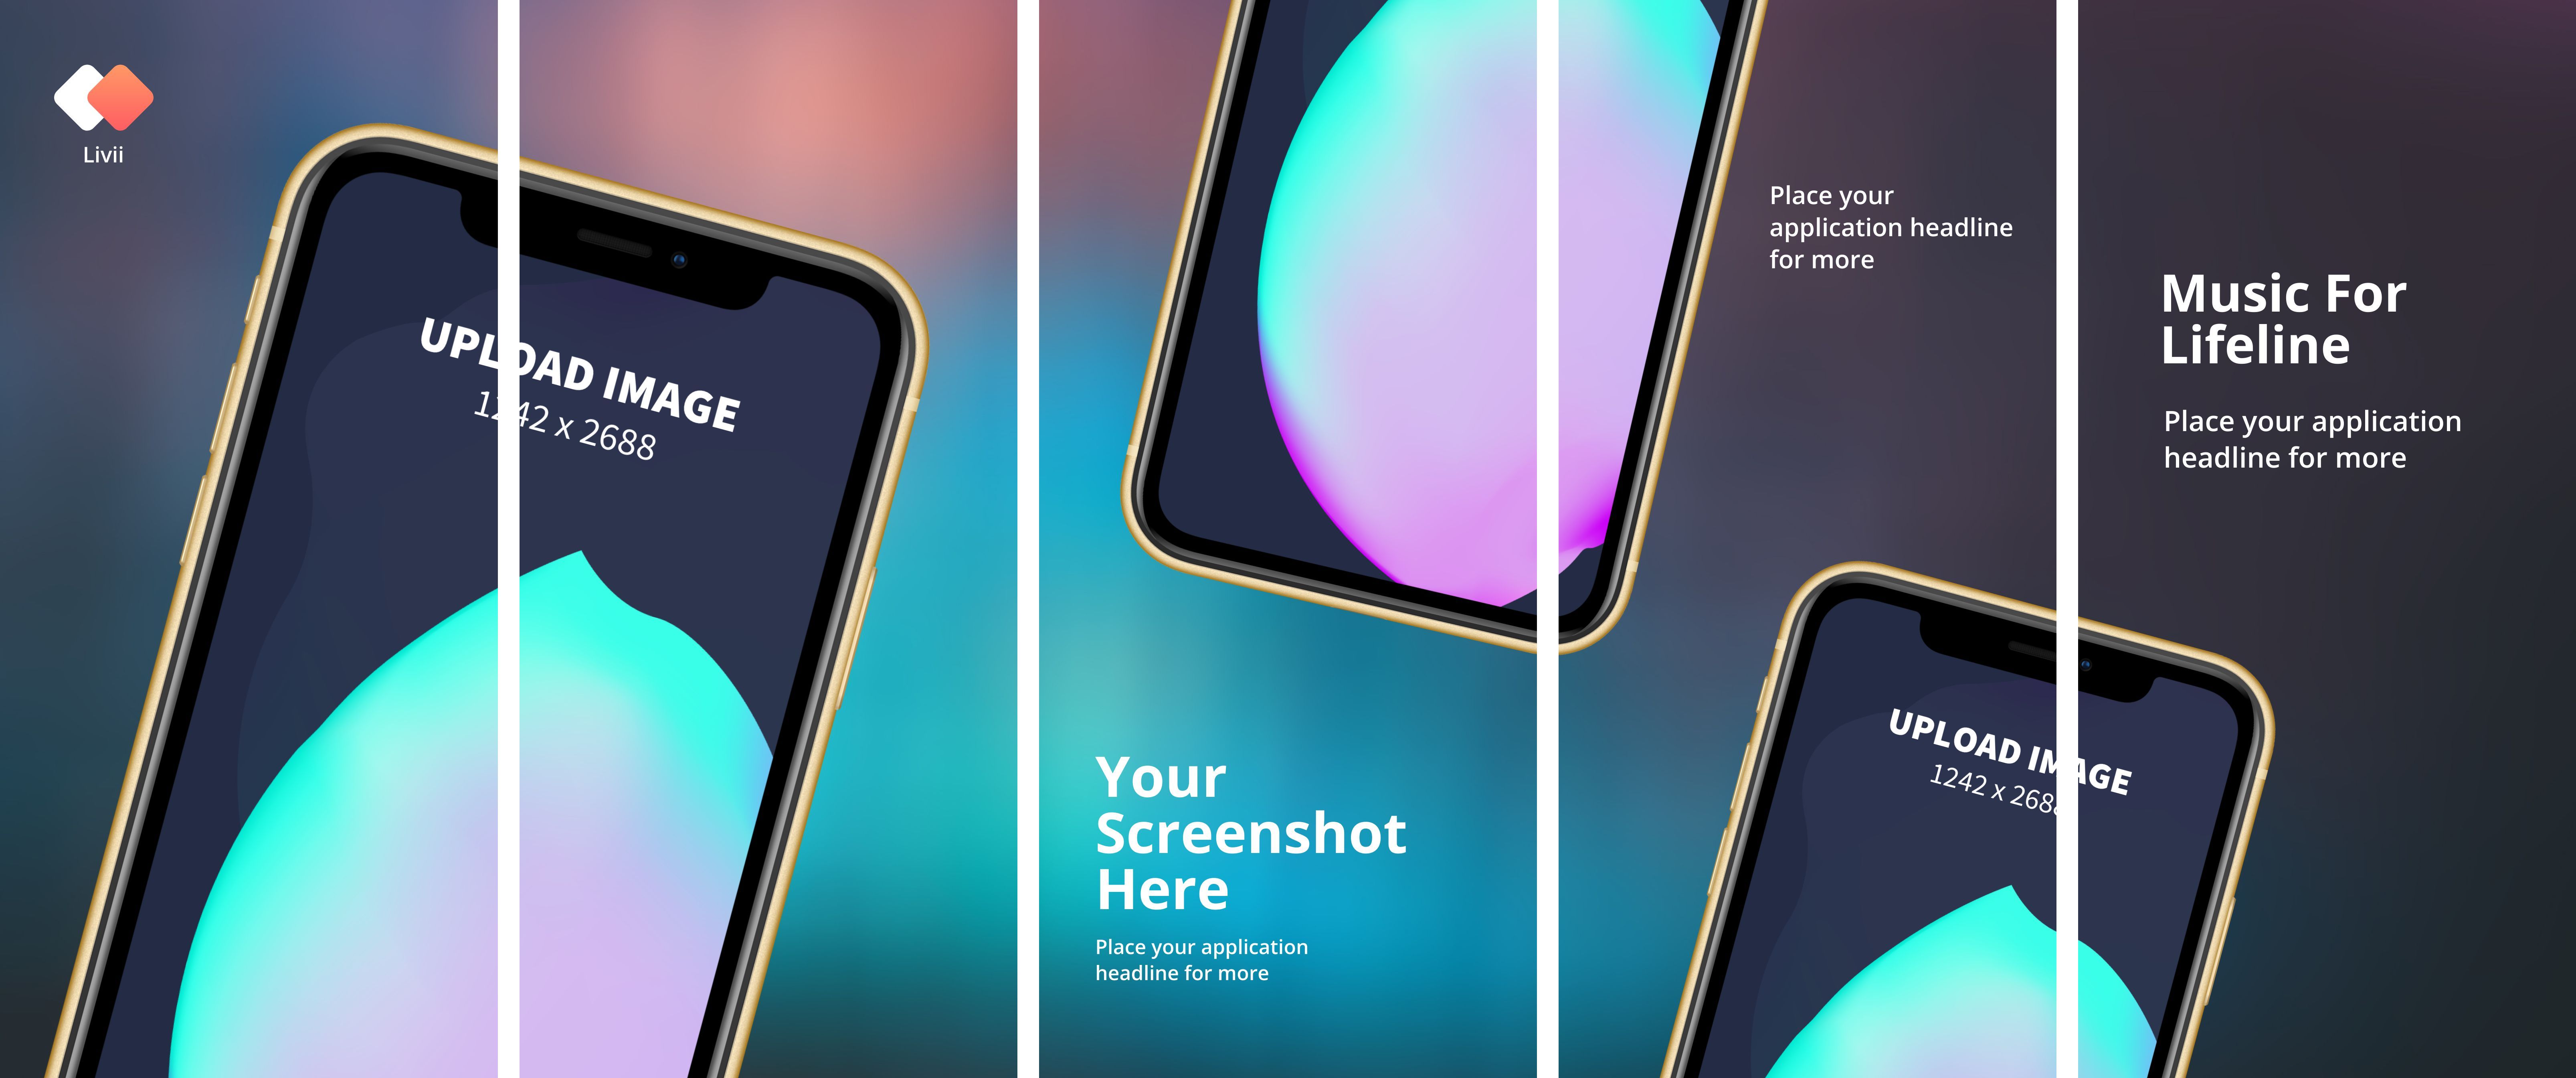 App Store Panorama Screenshot - iPhone XS Max 17 template. Quickly edit text, colors, images, and more for free.